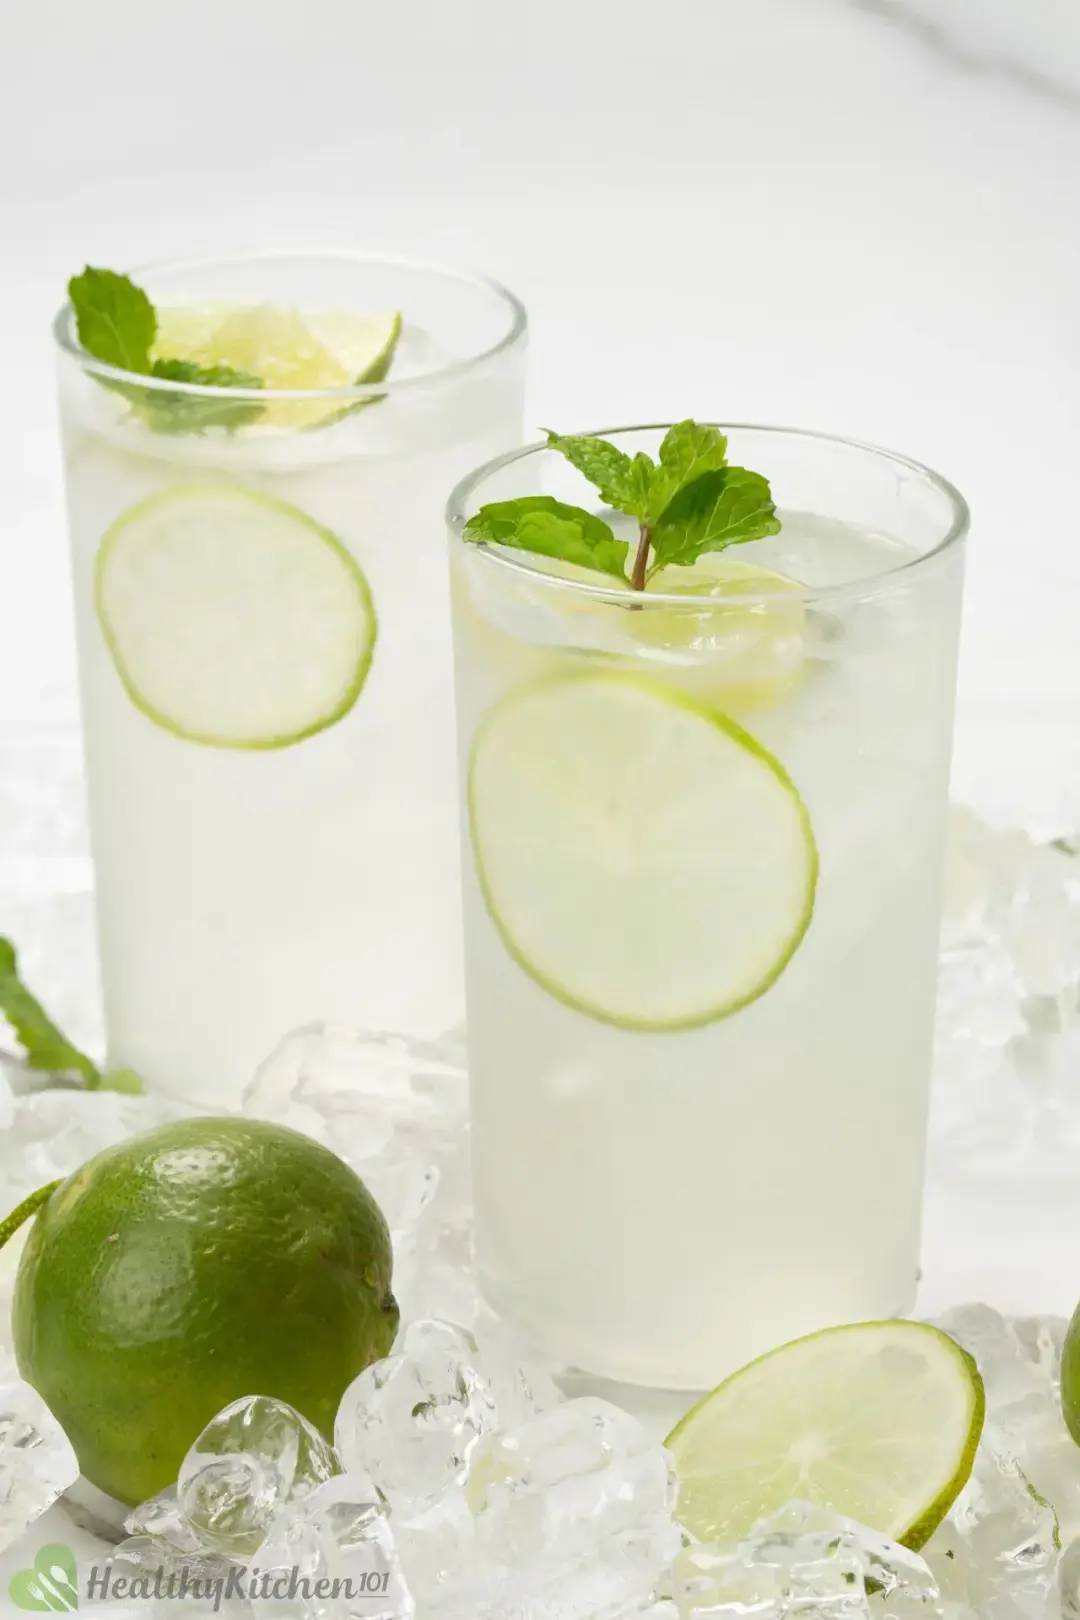 Can I Substitute Bottled Lime Juice for Fresh Lime Juice